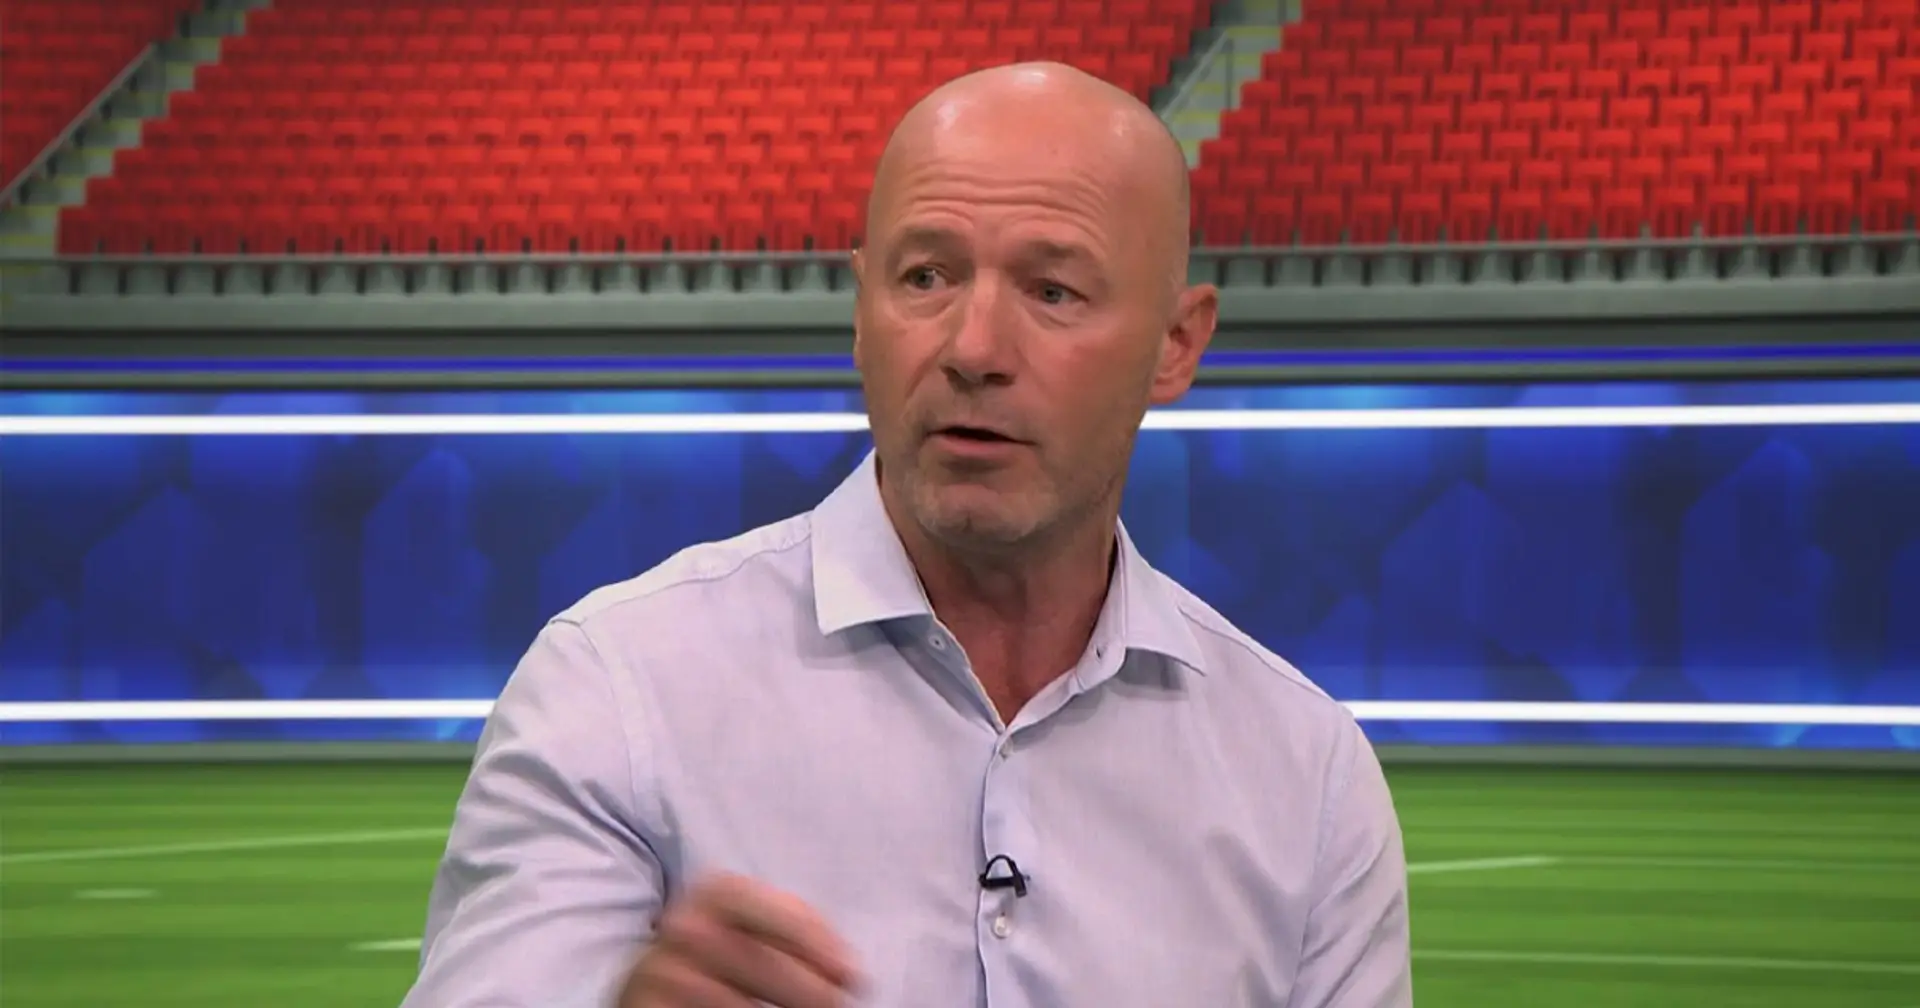 'Lampard must have been a nervous wreck': Alan Shearer breaks down Chelsea's defensive issues vs So'ton